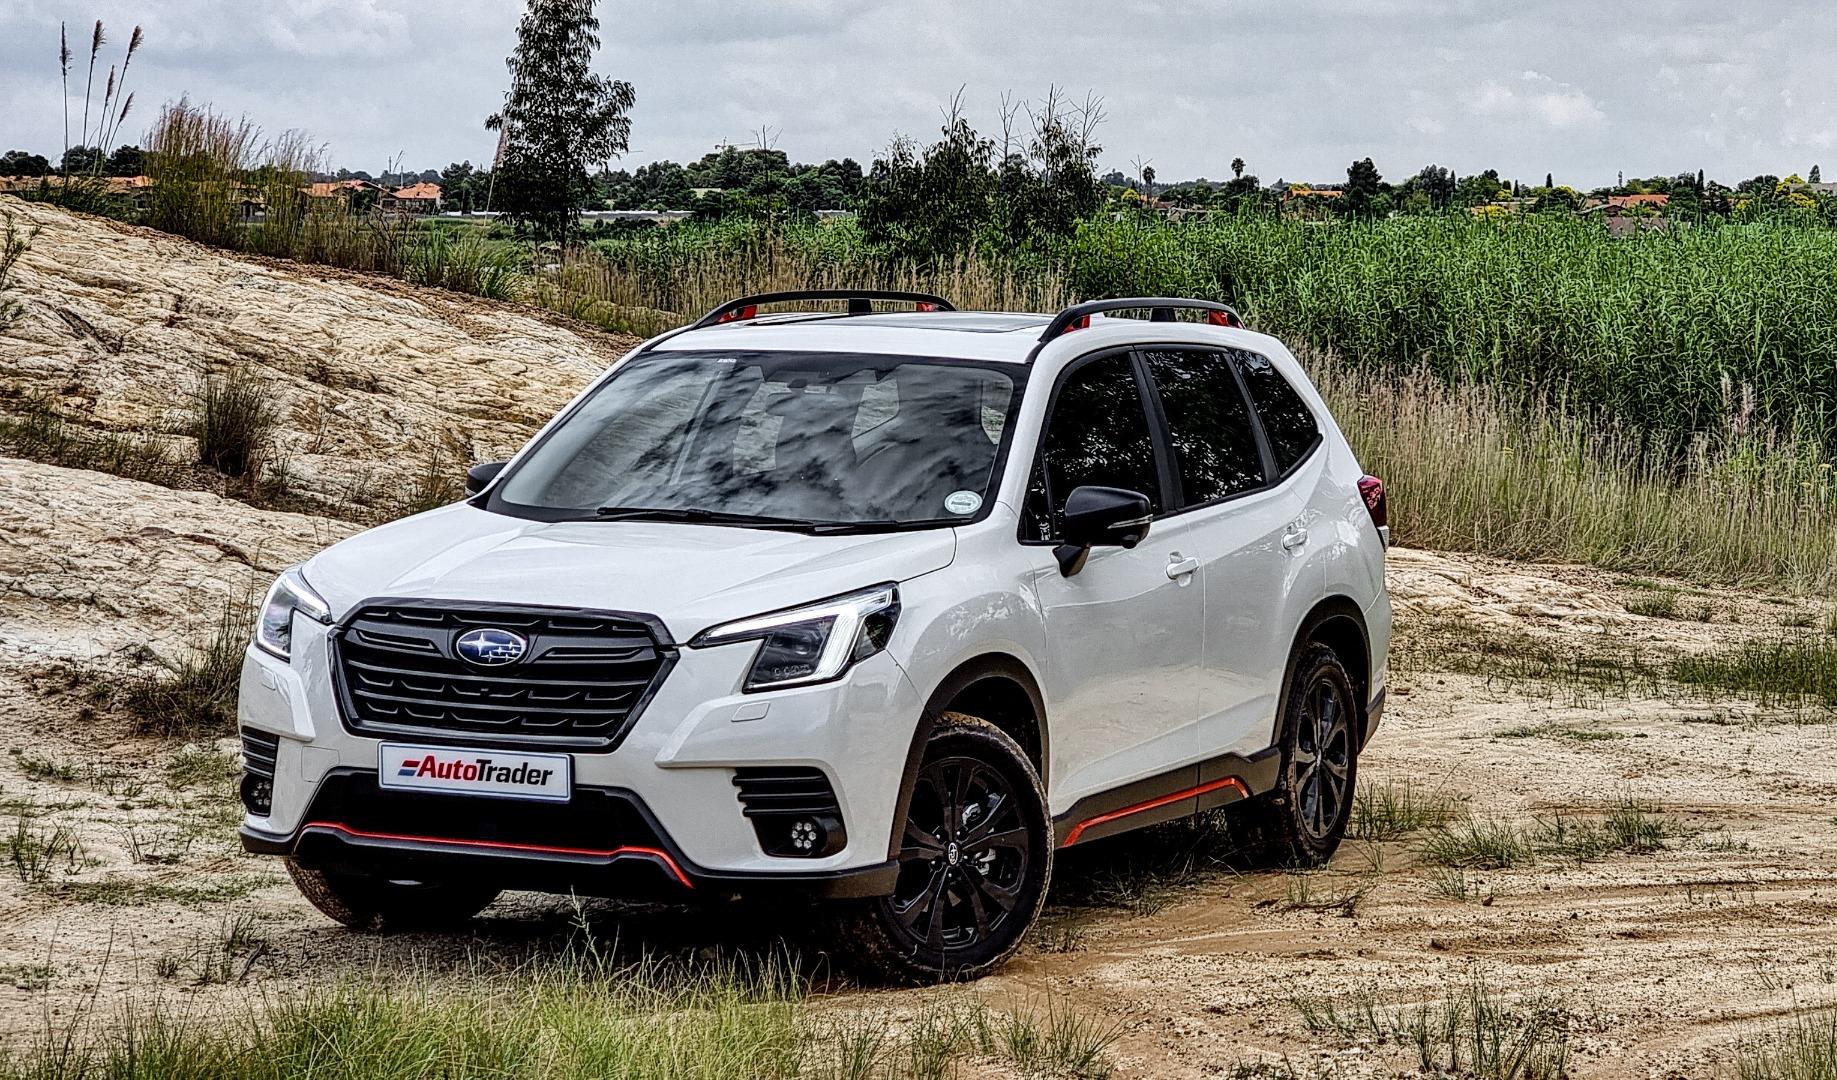 Subaru Forester 2.5i-Sport ES (2022) review: A competent, capable